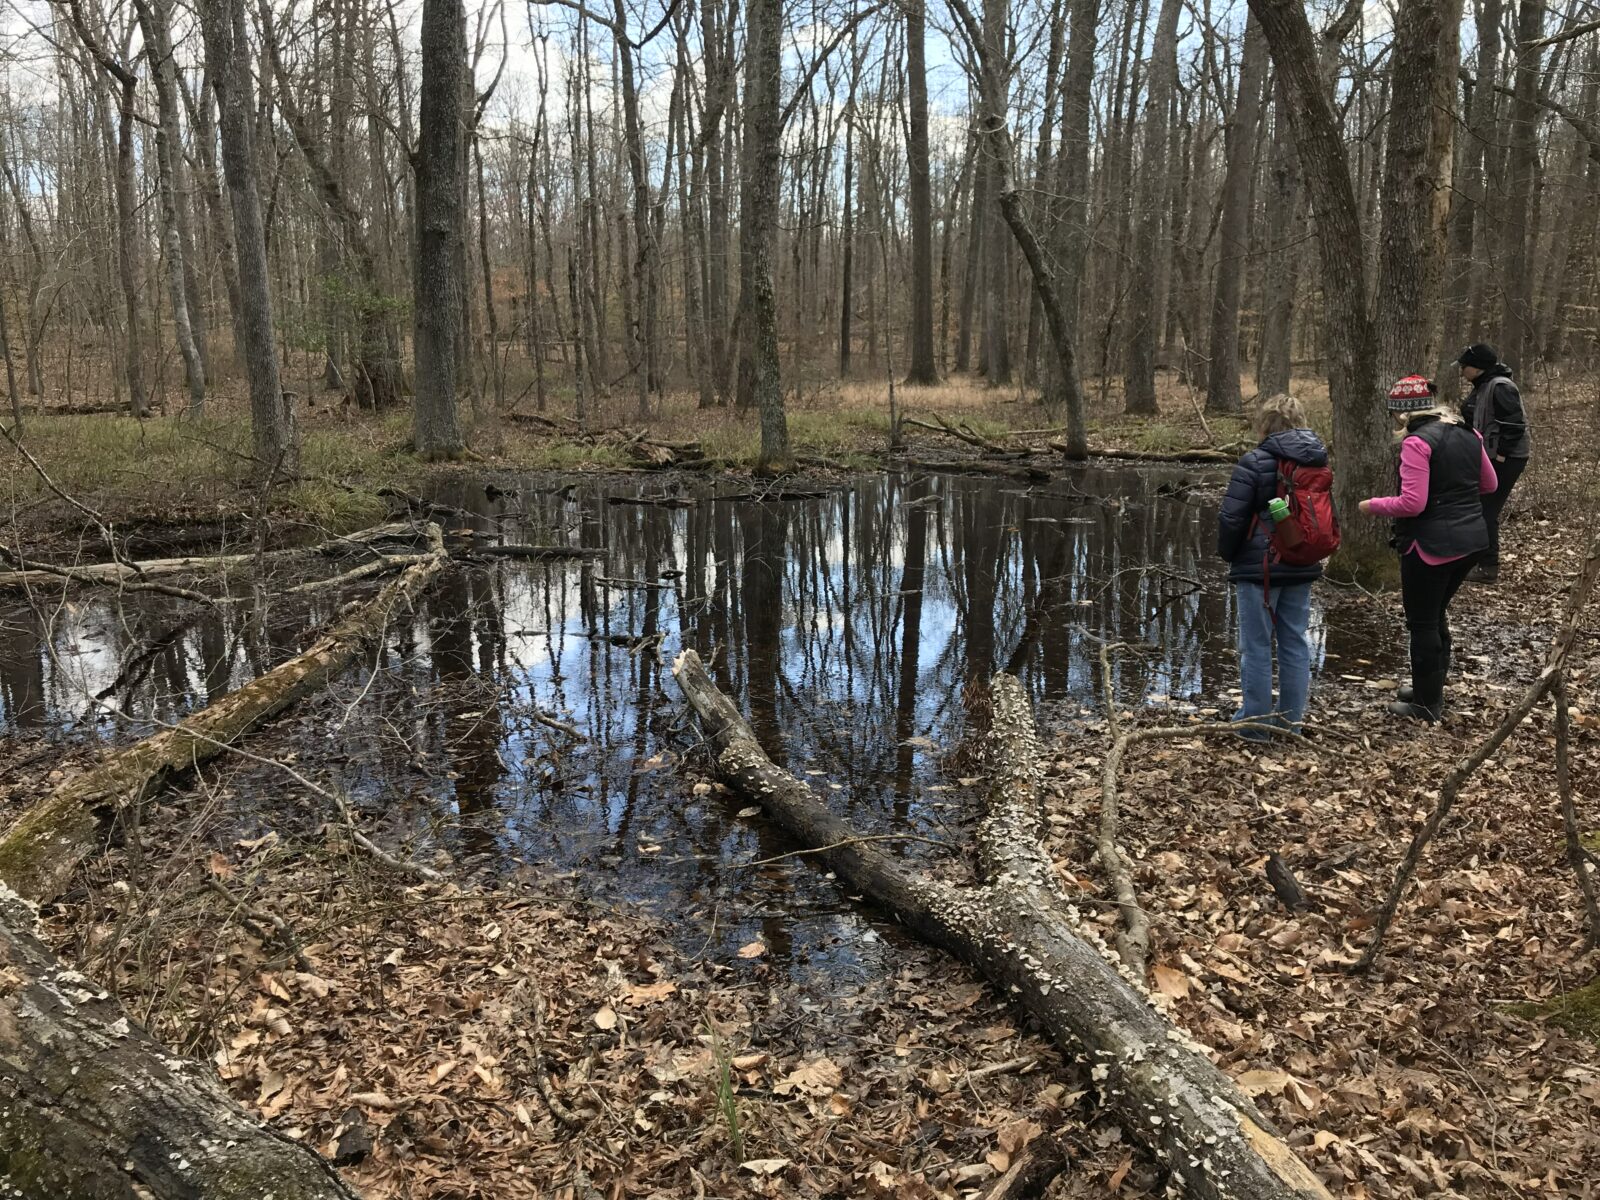 A group of people standing around a vernal pool in a hardwood forest; vernal pools look like really large puddles, just quite a bit bigger.